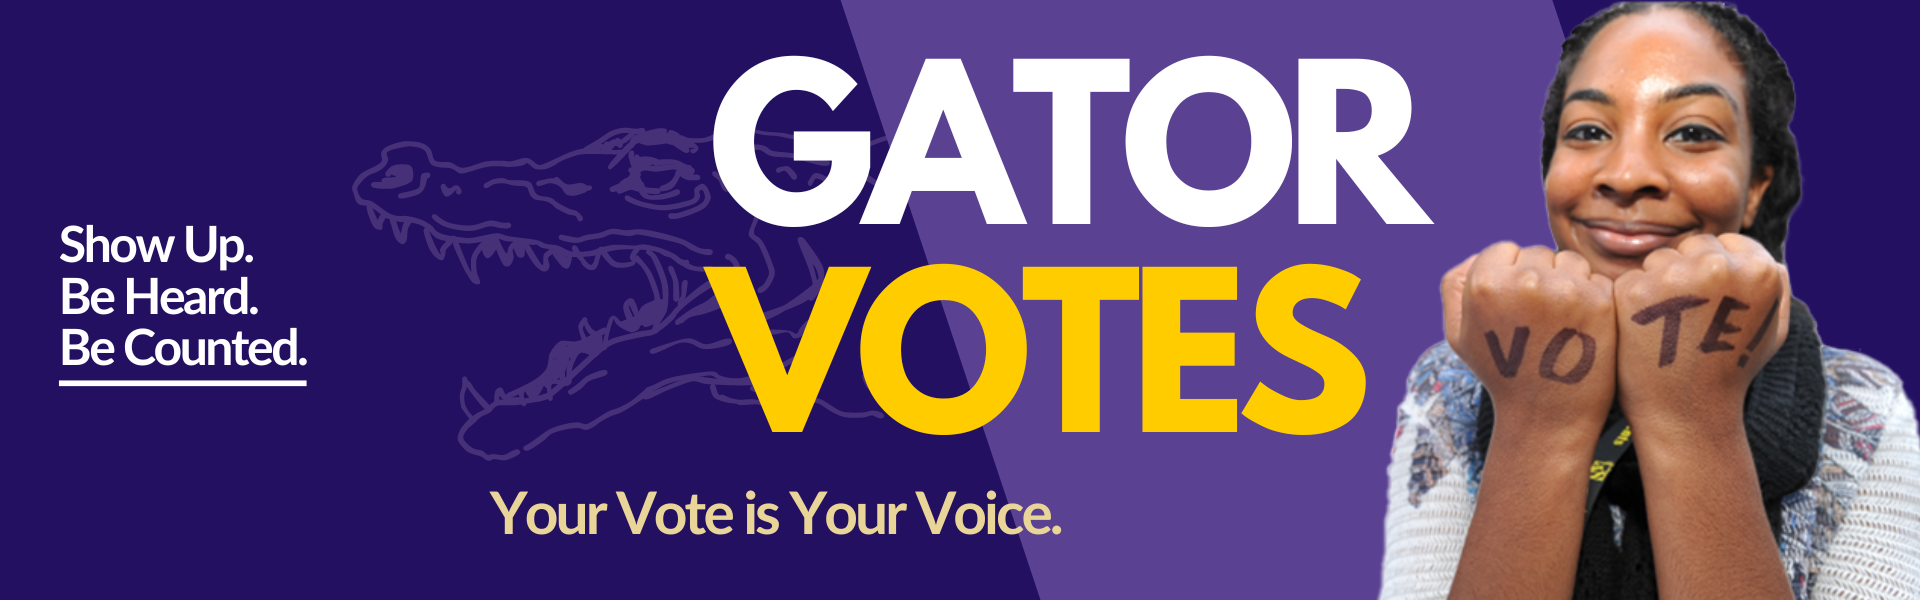 Gator Votes Banner with student and vote on her hands